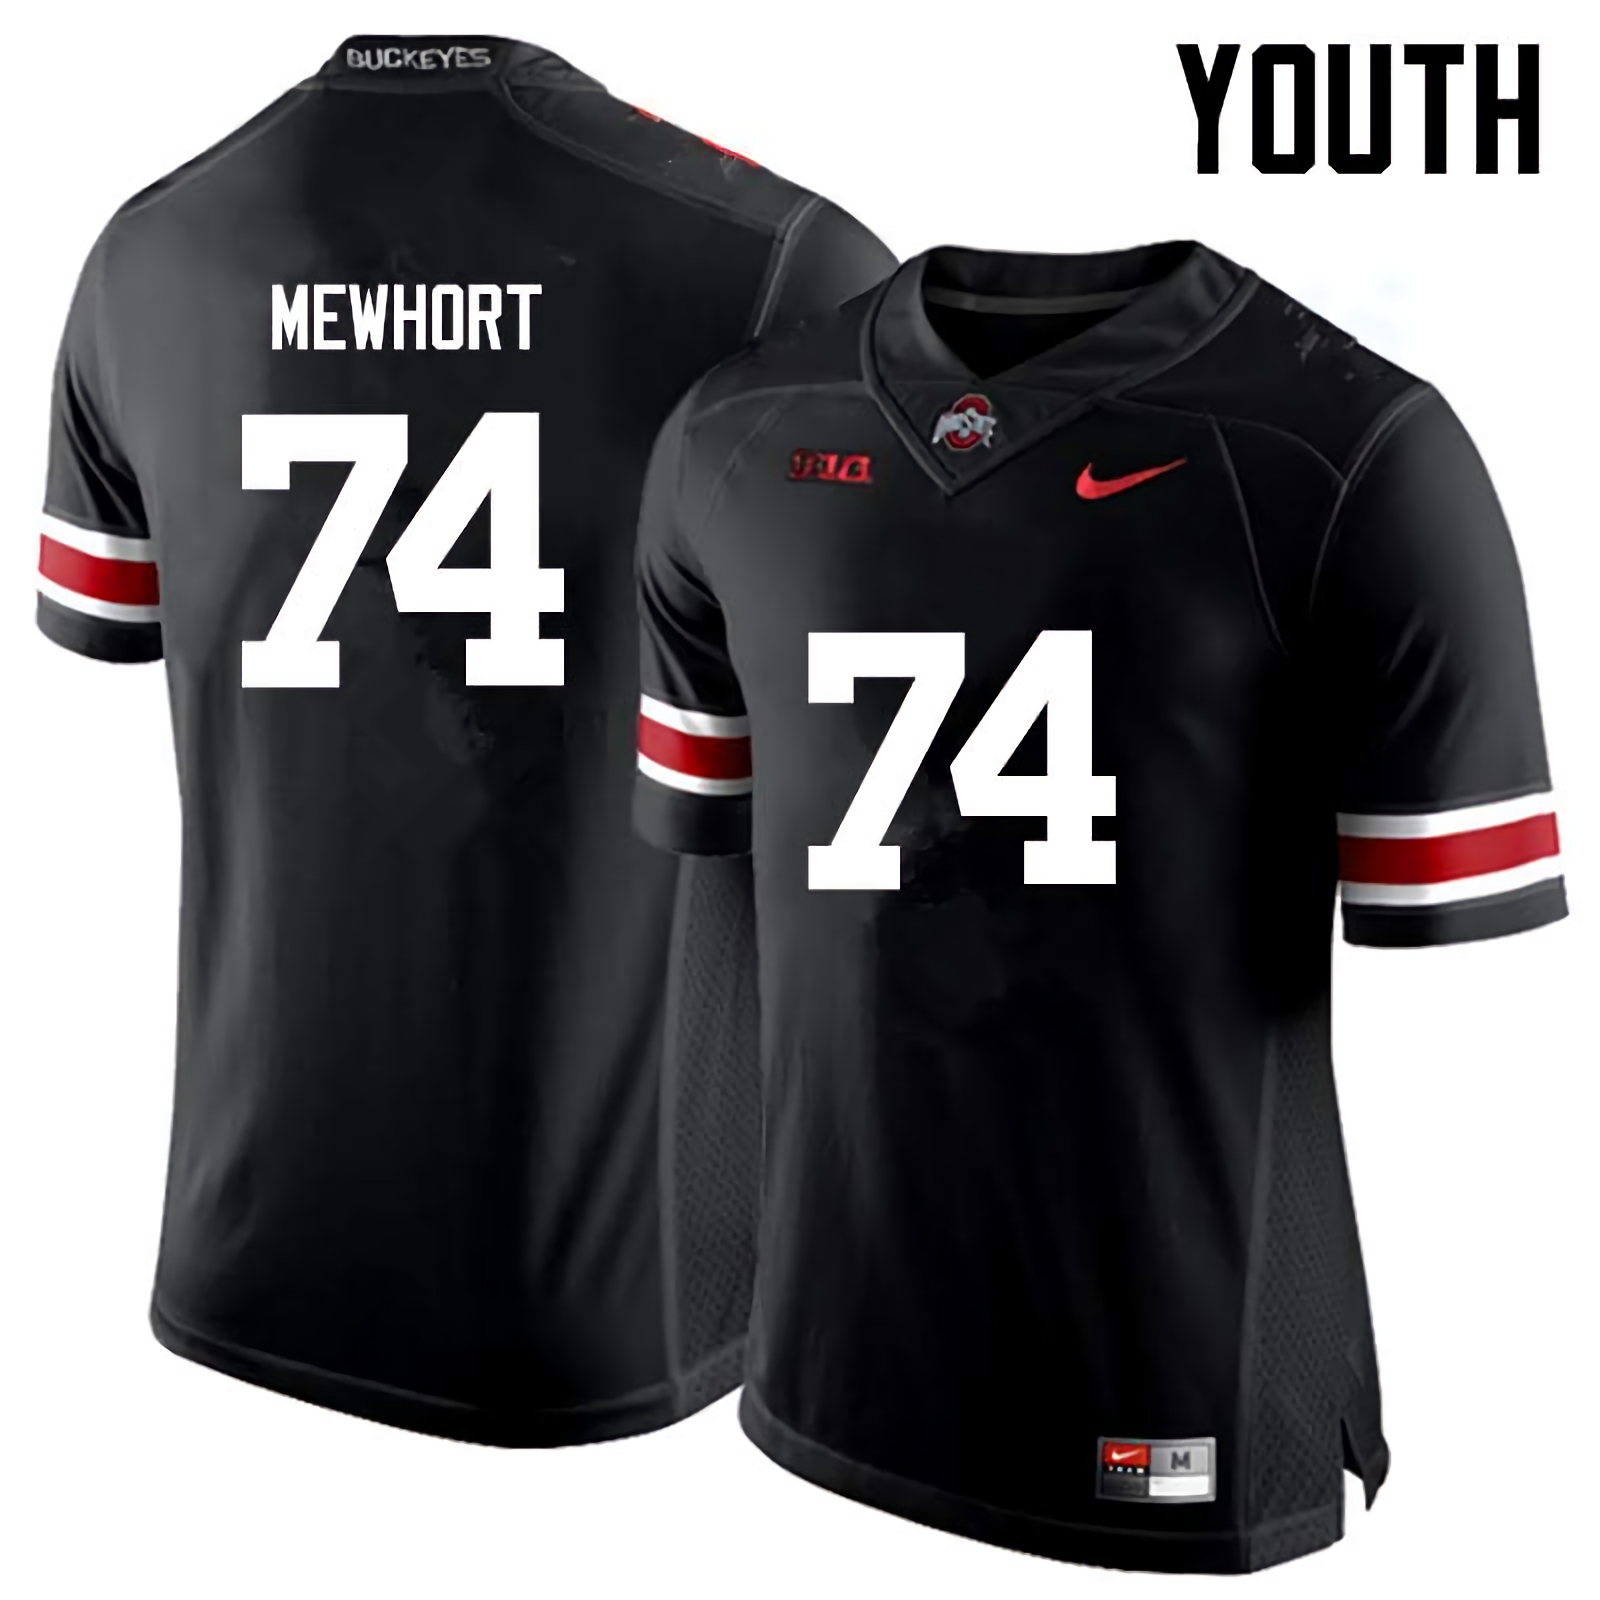 Jack Mewhort Ohio State Buckeyes Youth NCAA #74 Nike Black College Stitched Football Jersey ANV6656ZP